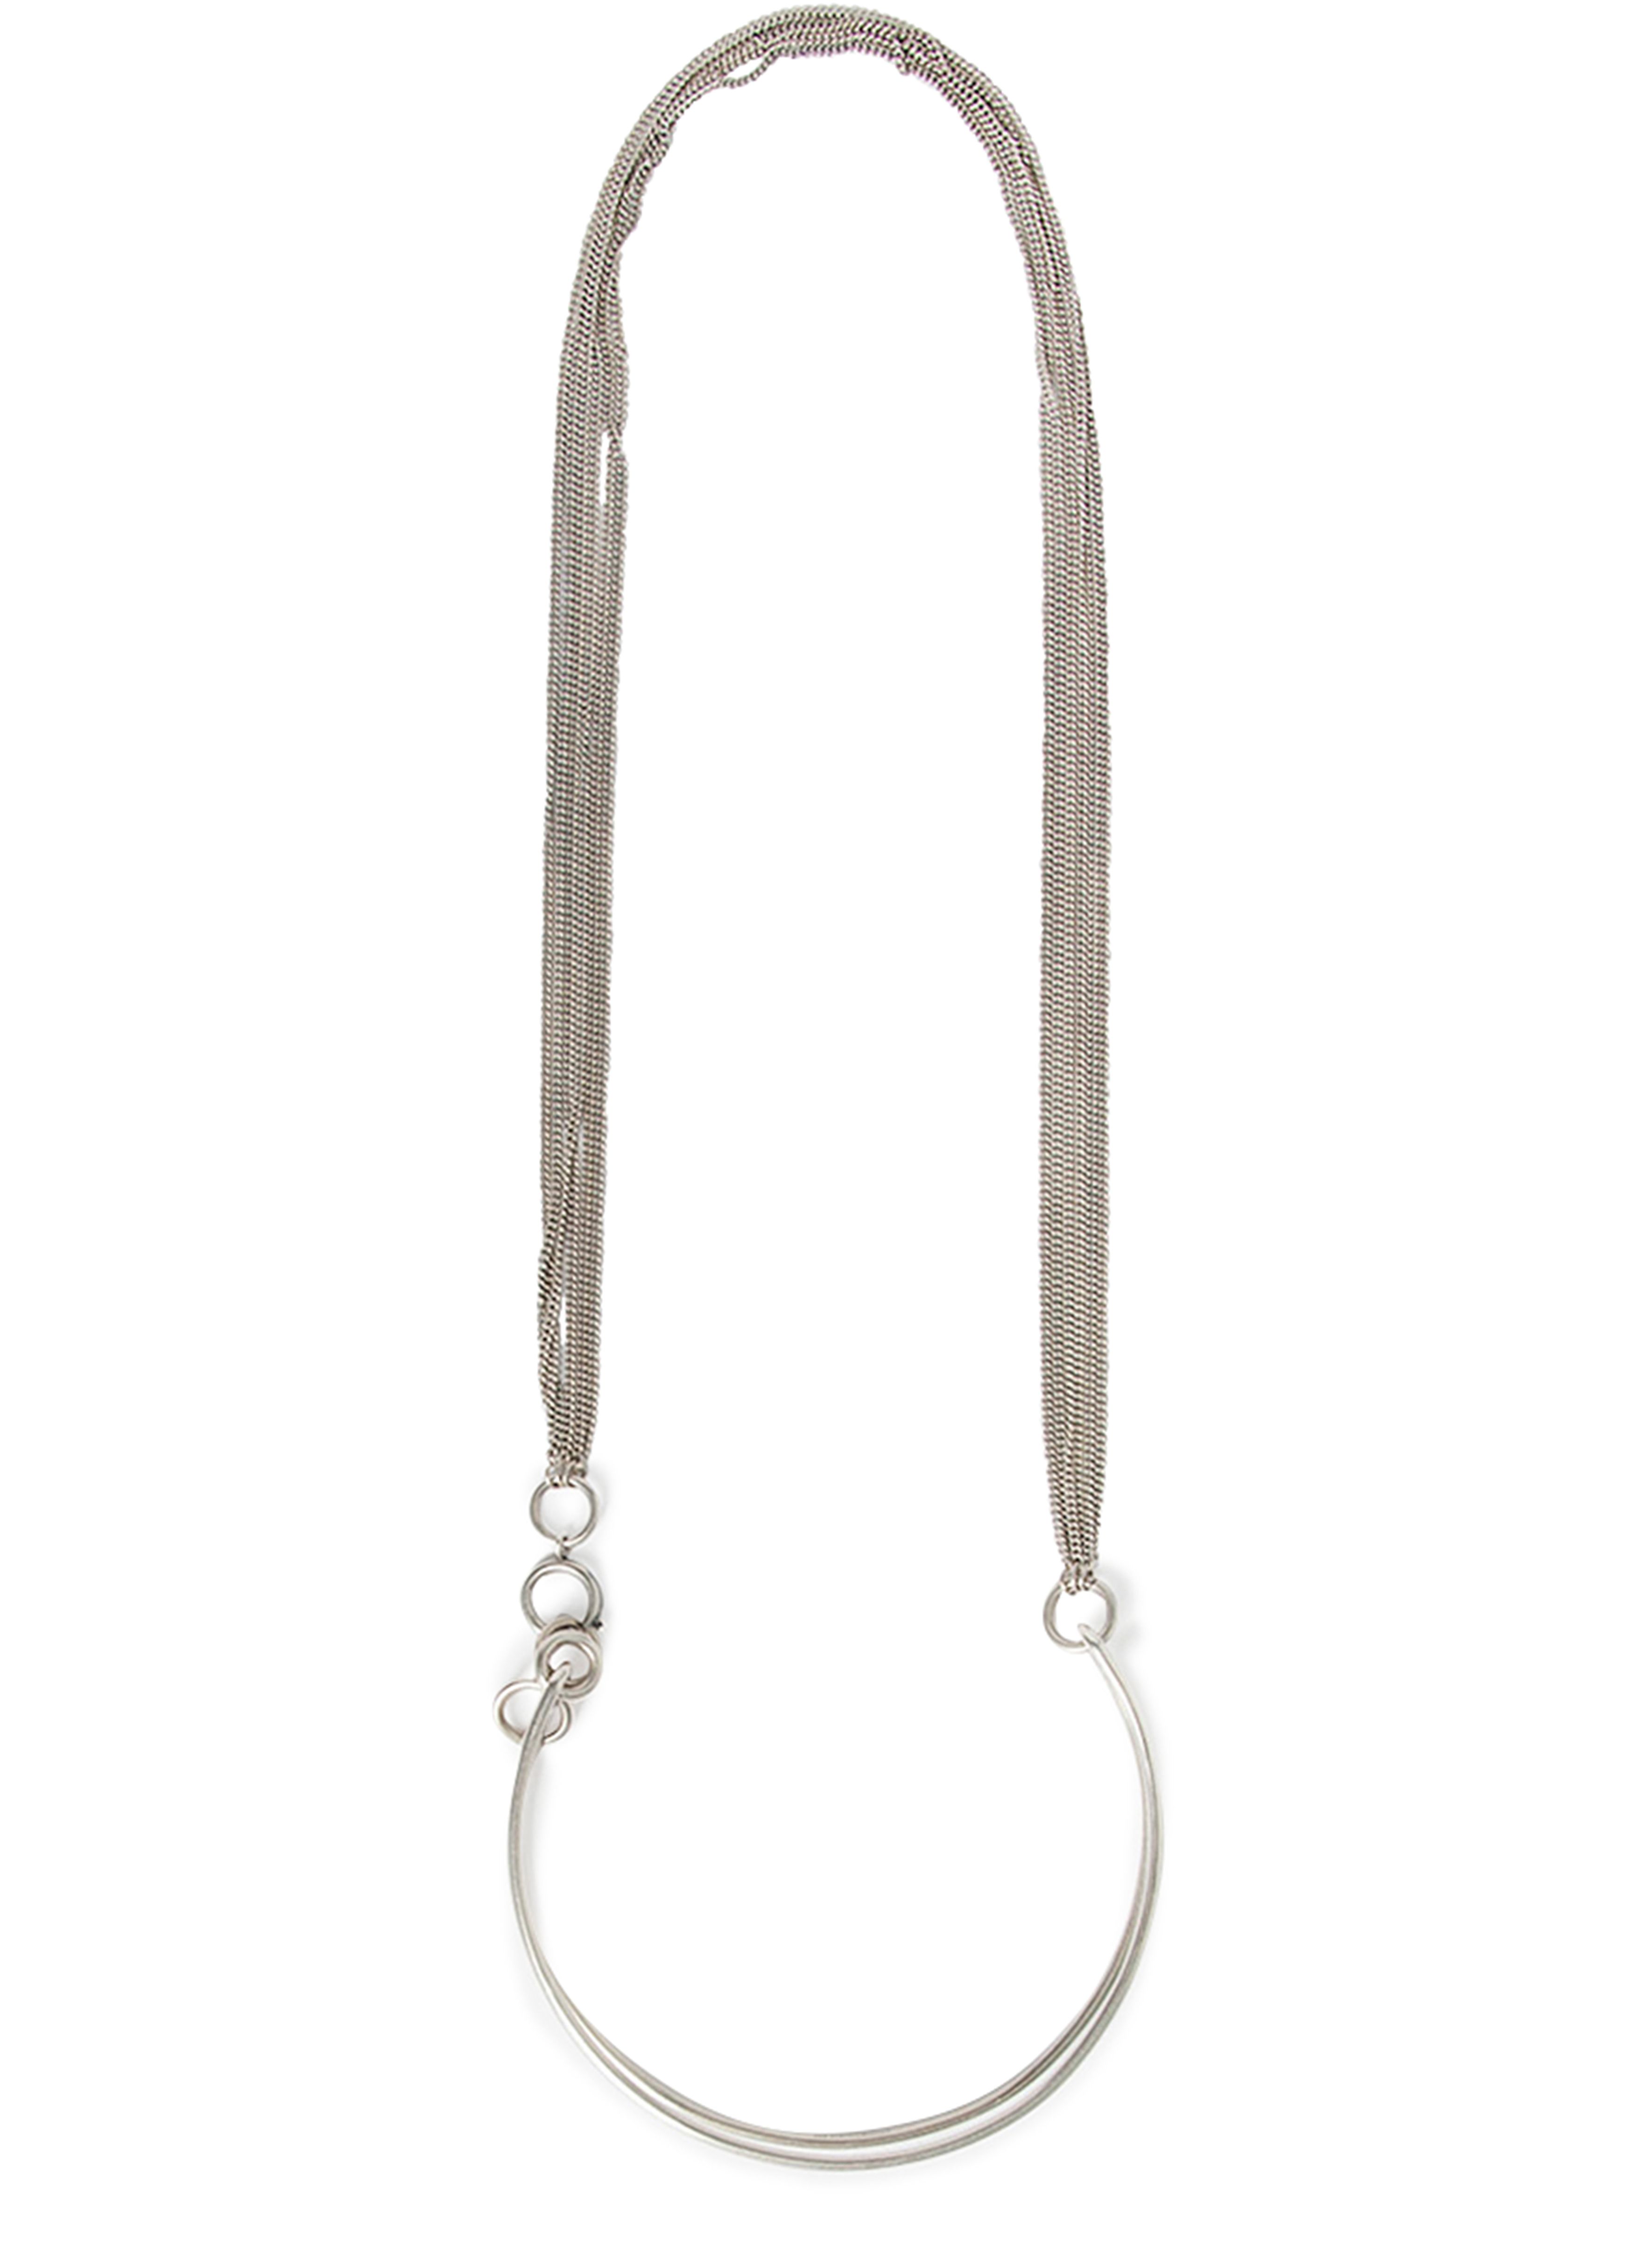 Ann Demeulemeester Pina curved tube necklace with chains